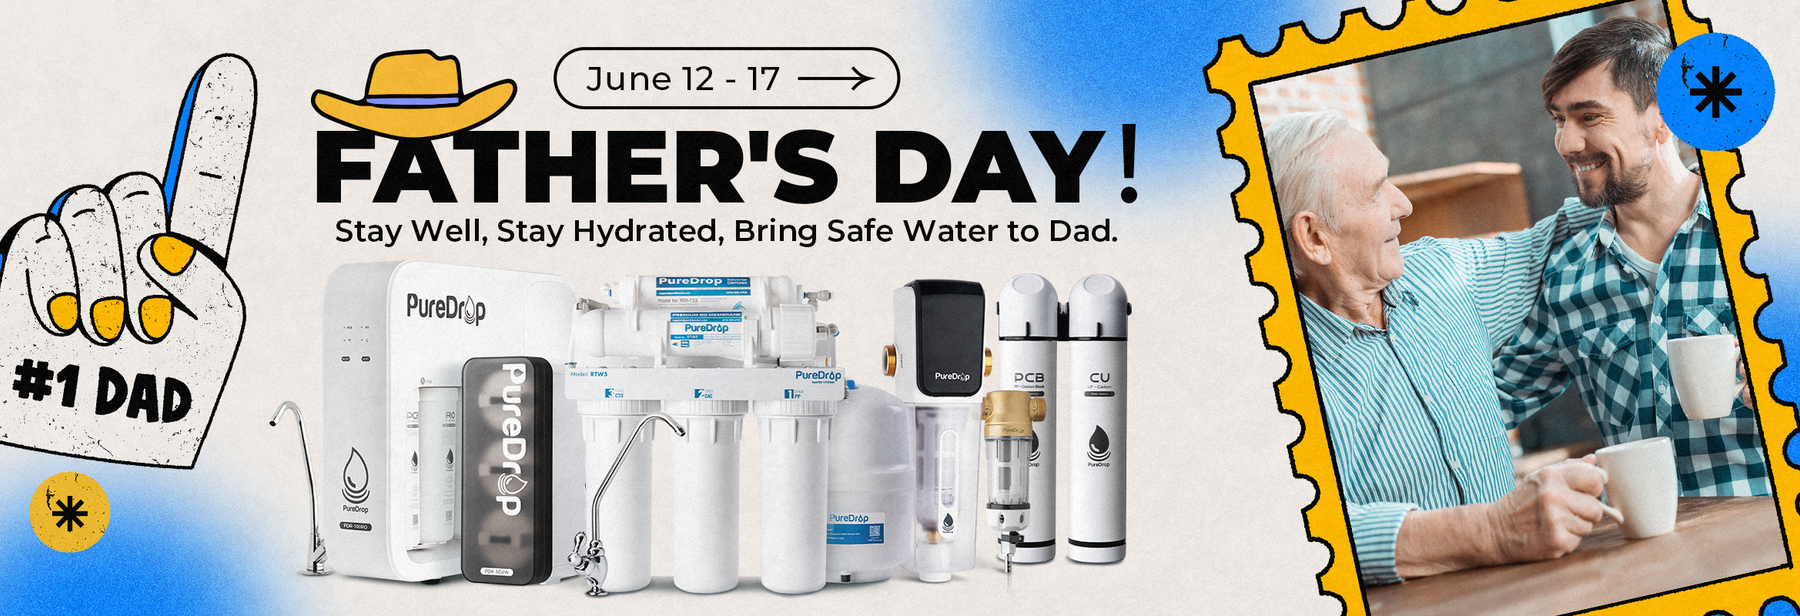 A Water Filtration System: The Ultimate Father's Day Gift for Dad's Health